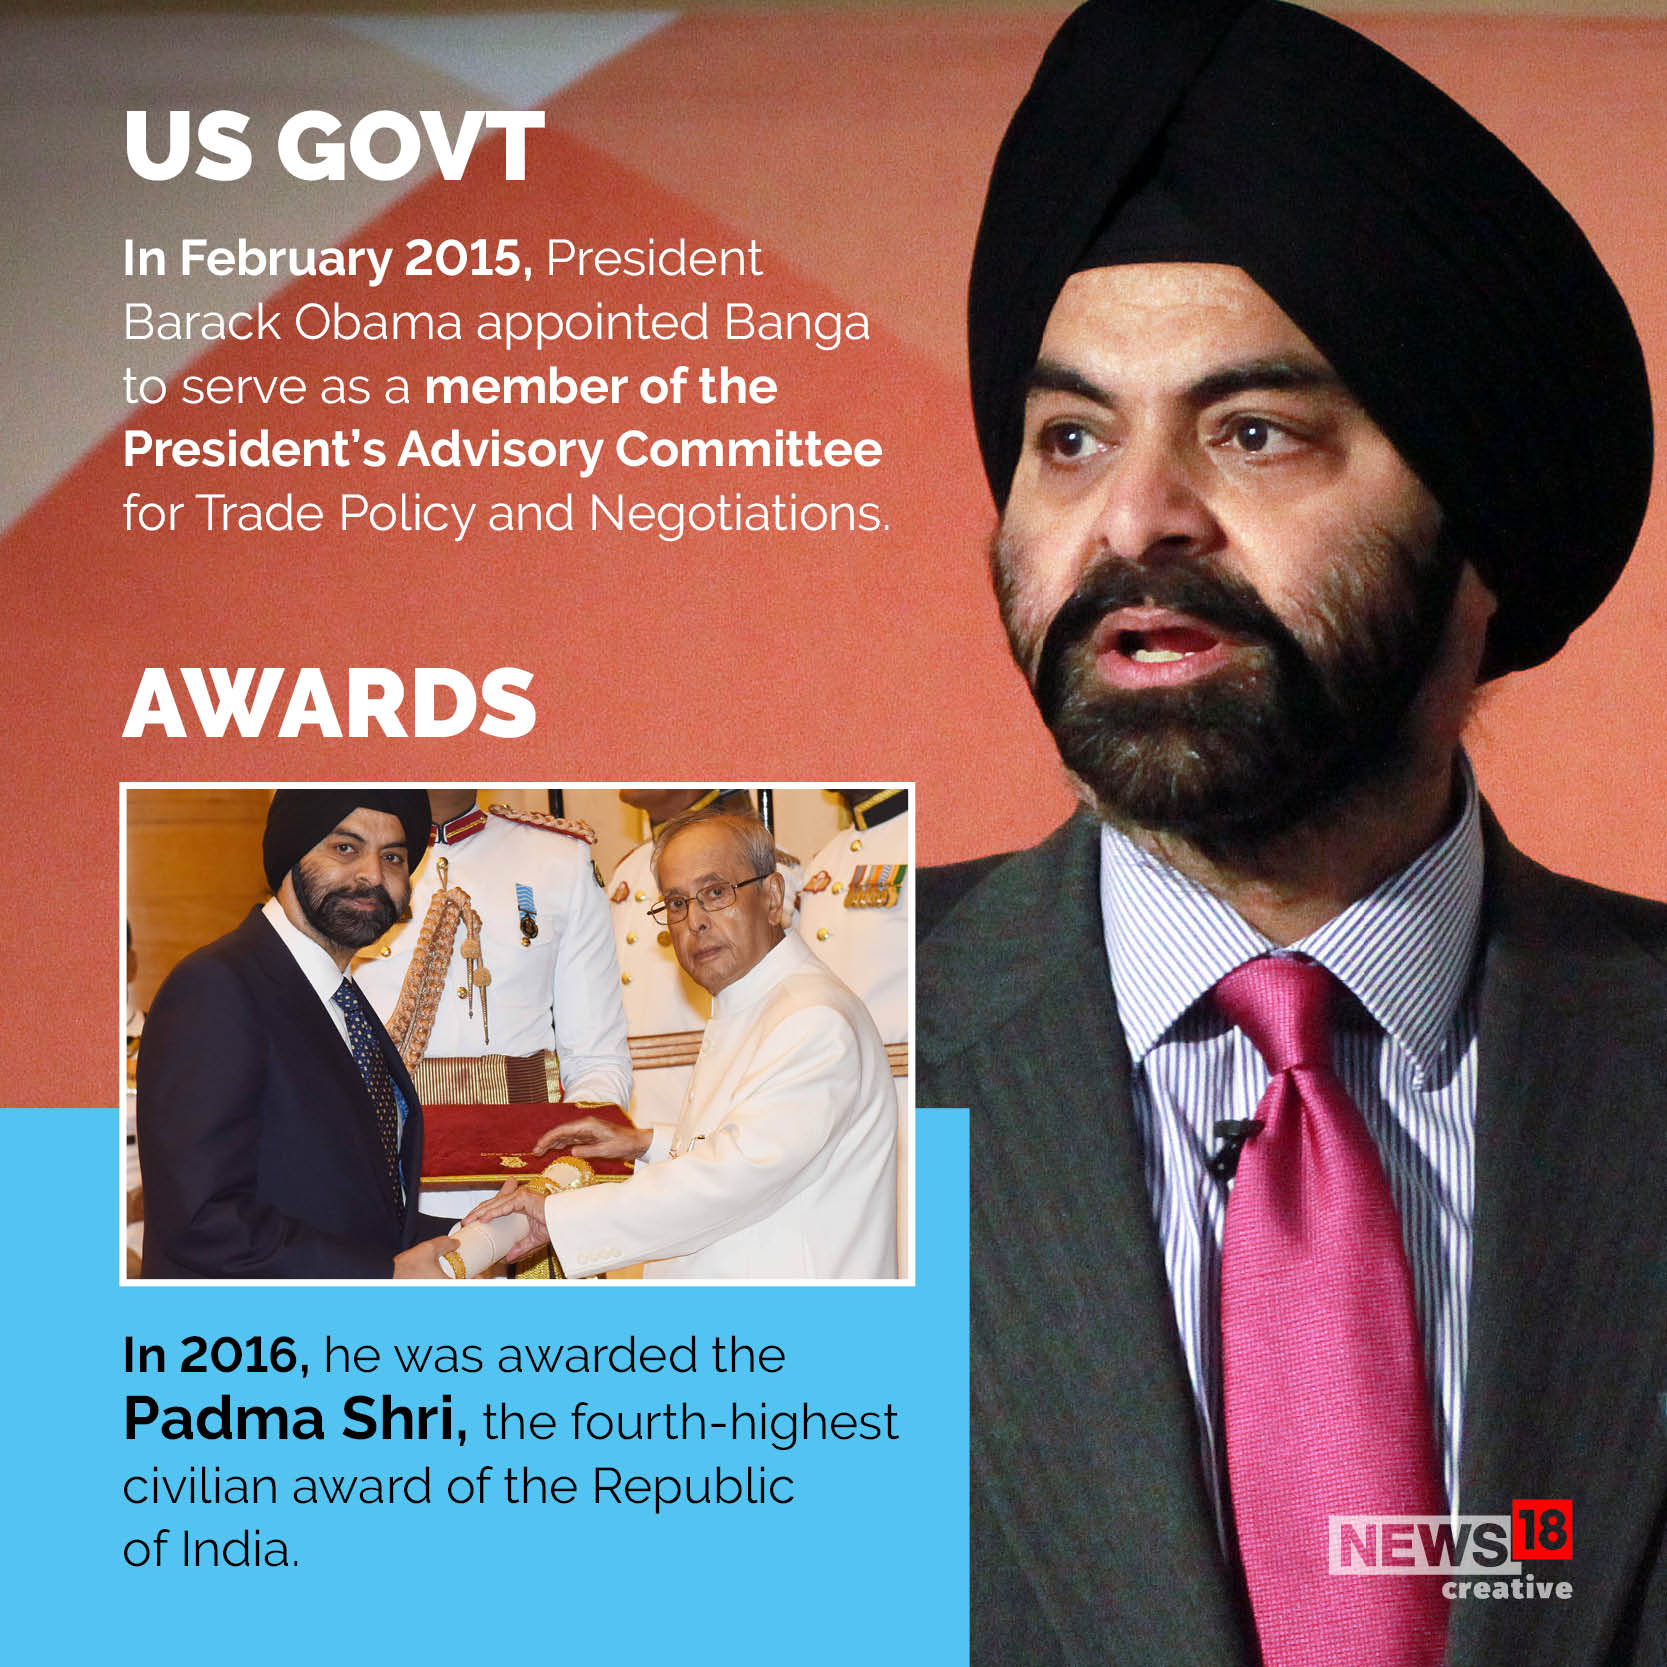 Who is Ajay Banga, the US candidate to lead the World Bank?